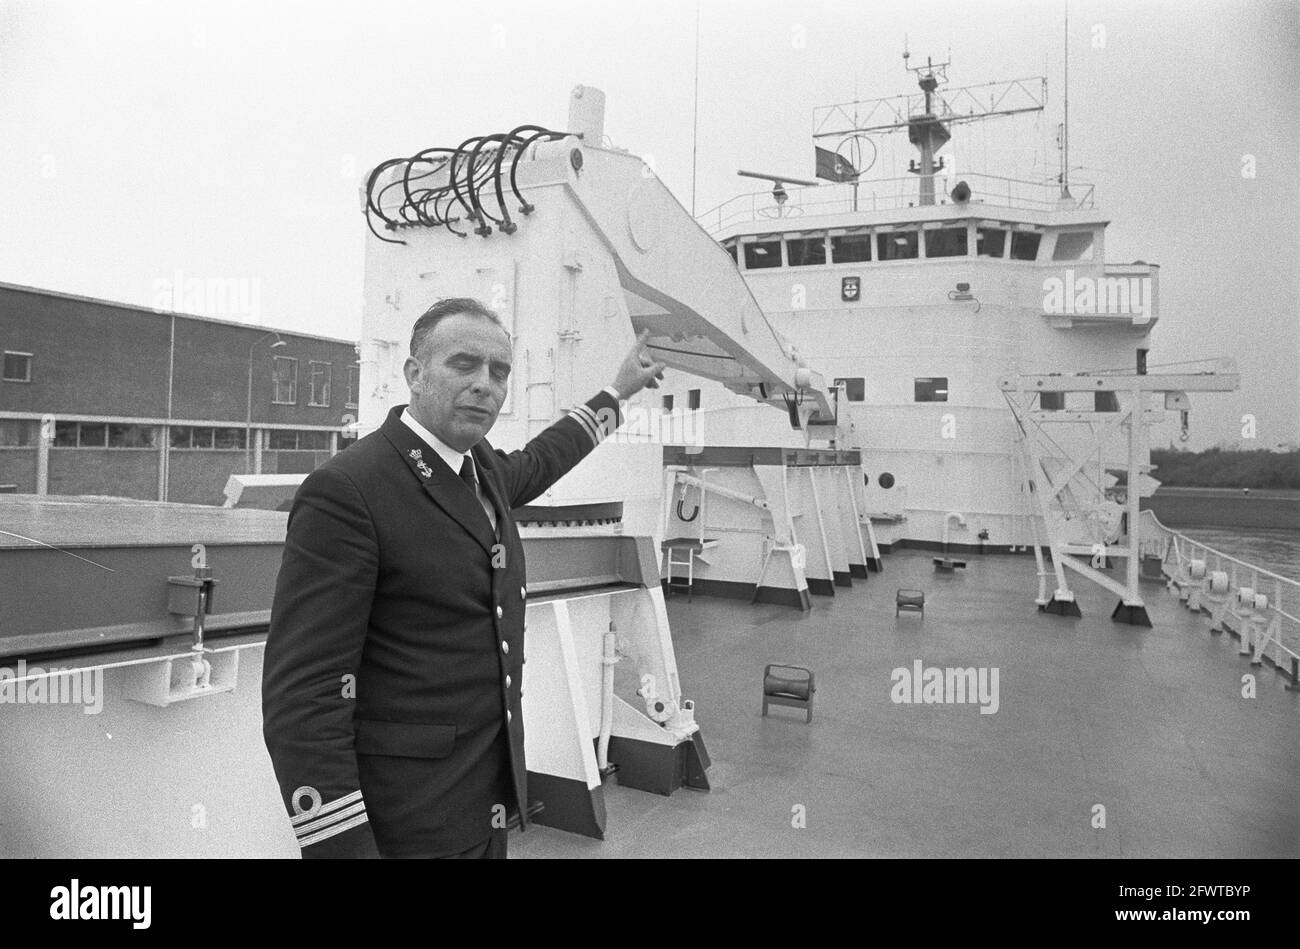 Oceanographic vessel Hr. Ms. Tydeman transferred to Royal Navy at Den Helder; the commander, KLTZ H.N.B. Roels, November 10, 1976, commanders, Navy, ships, The Netherlands, 20th century press agency photo, news to remember, documentary, historic photography 1945-1990, visual stories, human history of the Twentieth Century, capturing moments in time Stock Photo